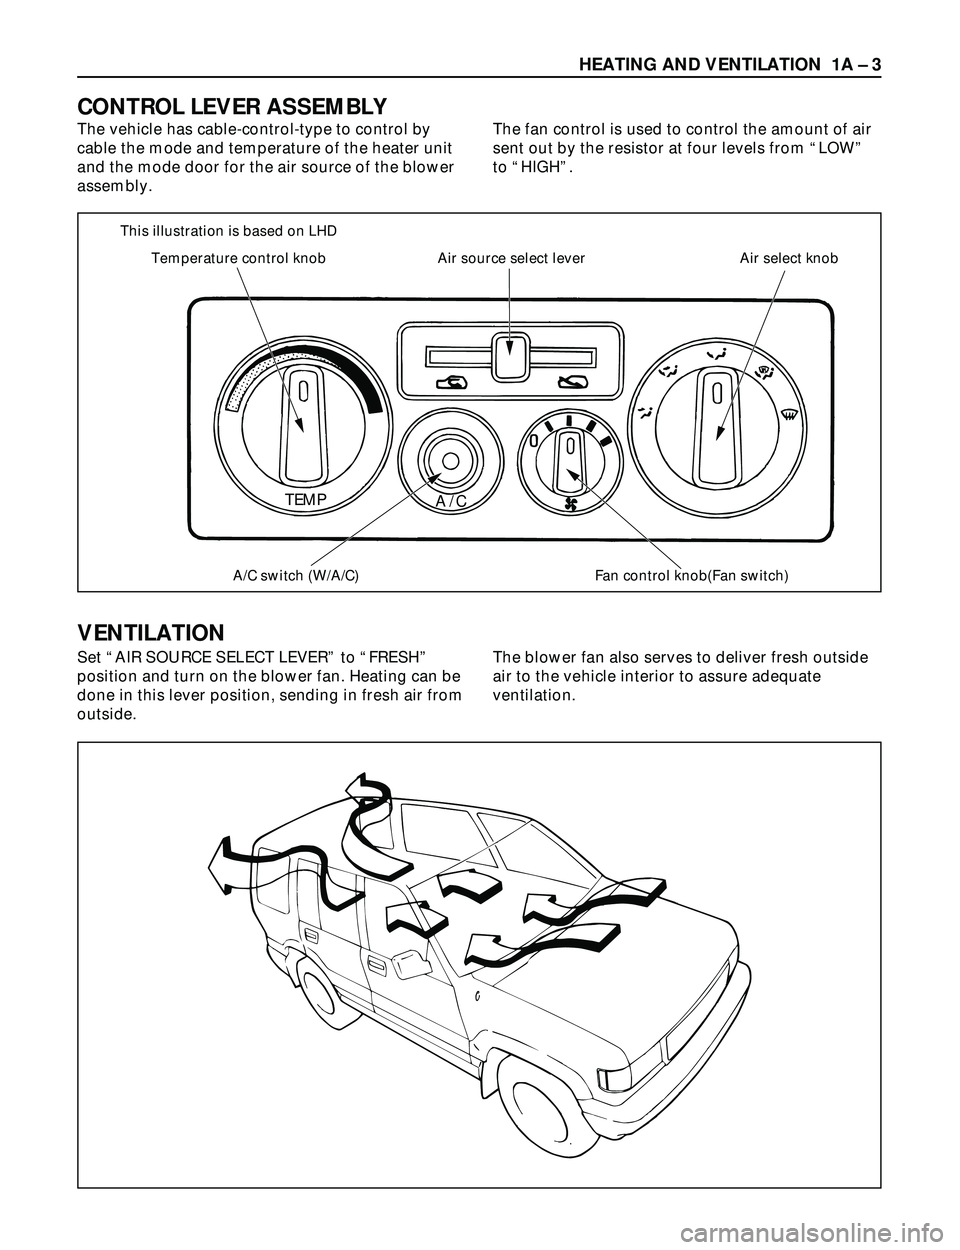 ISUZU TROOPER 1998  Service Repair Manual This illustration is based on LHD
Temperature control knob
A/C switch (W/A/C)
TEMP
A/C
Fan control knob(Fan switch) Air source select lever Air select knob
HEATING AND VENTILATION  1A Ð 3
The vehicle